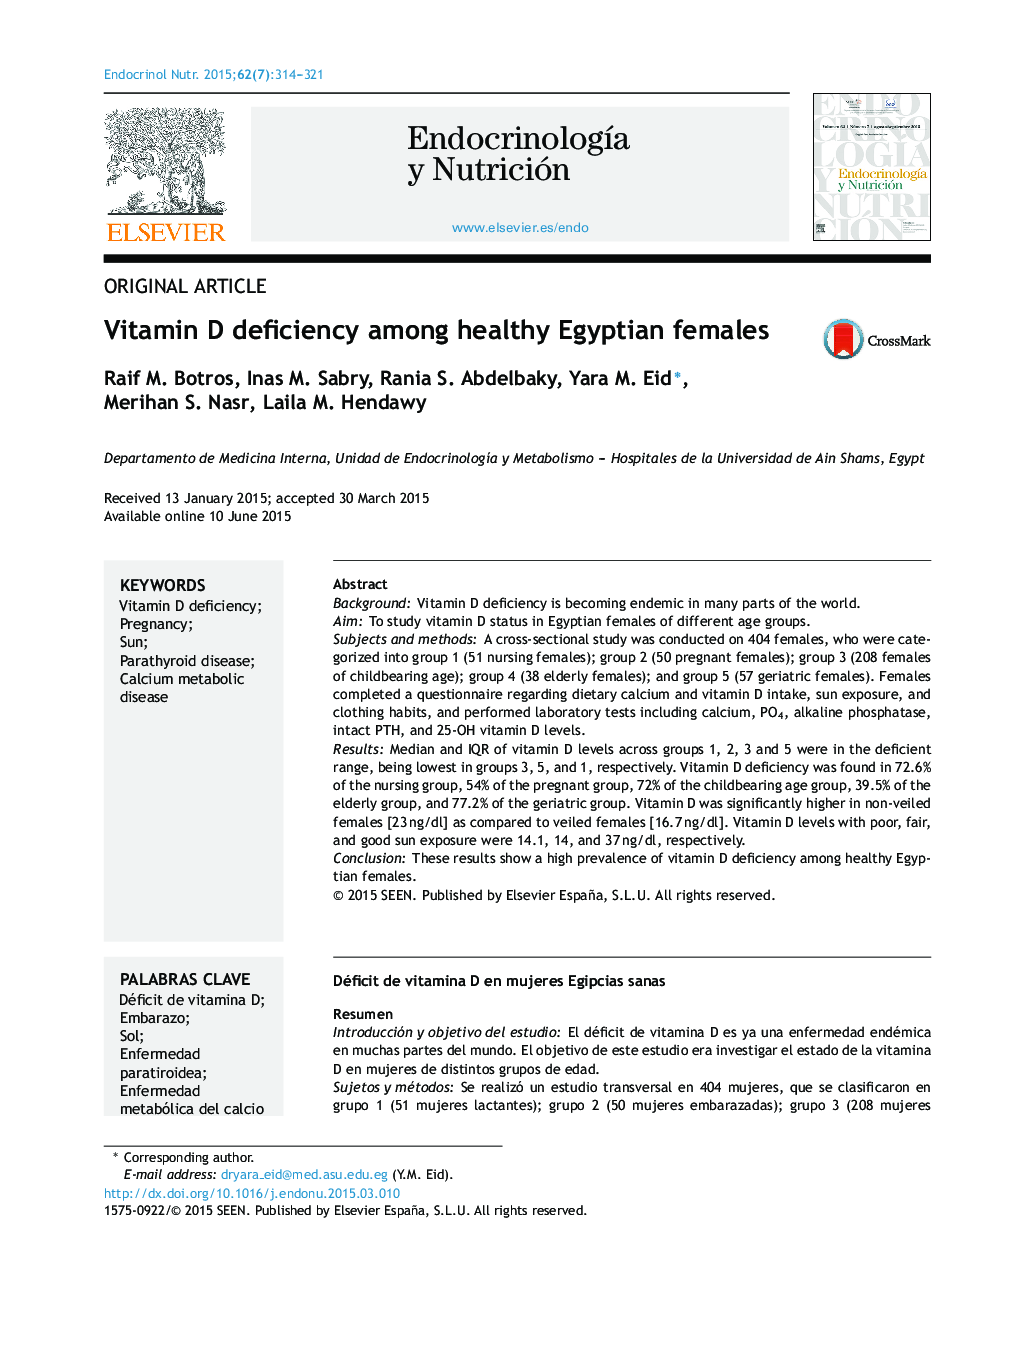 Vitamin D deficiency among healthy Egyptian females